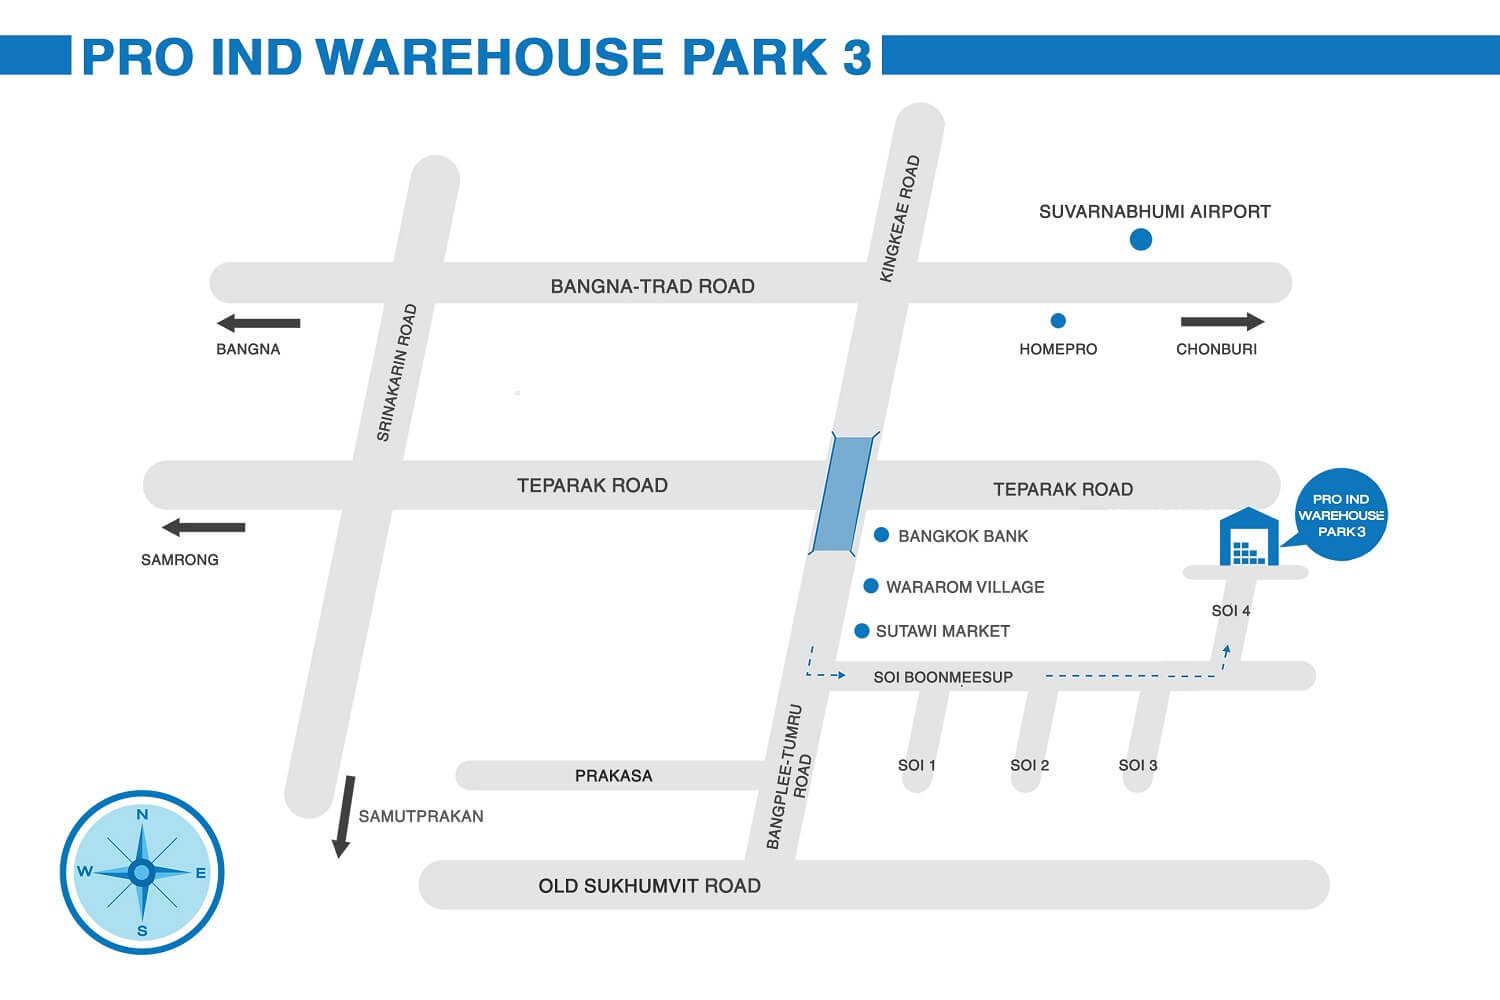 Pro Ind warehouse Park 3 Project Map 